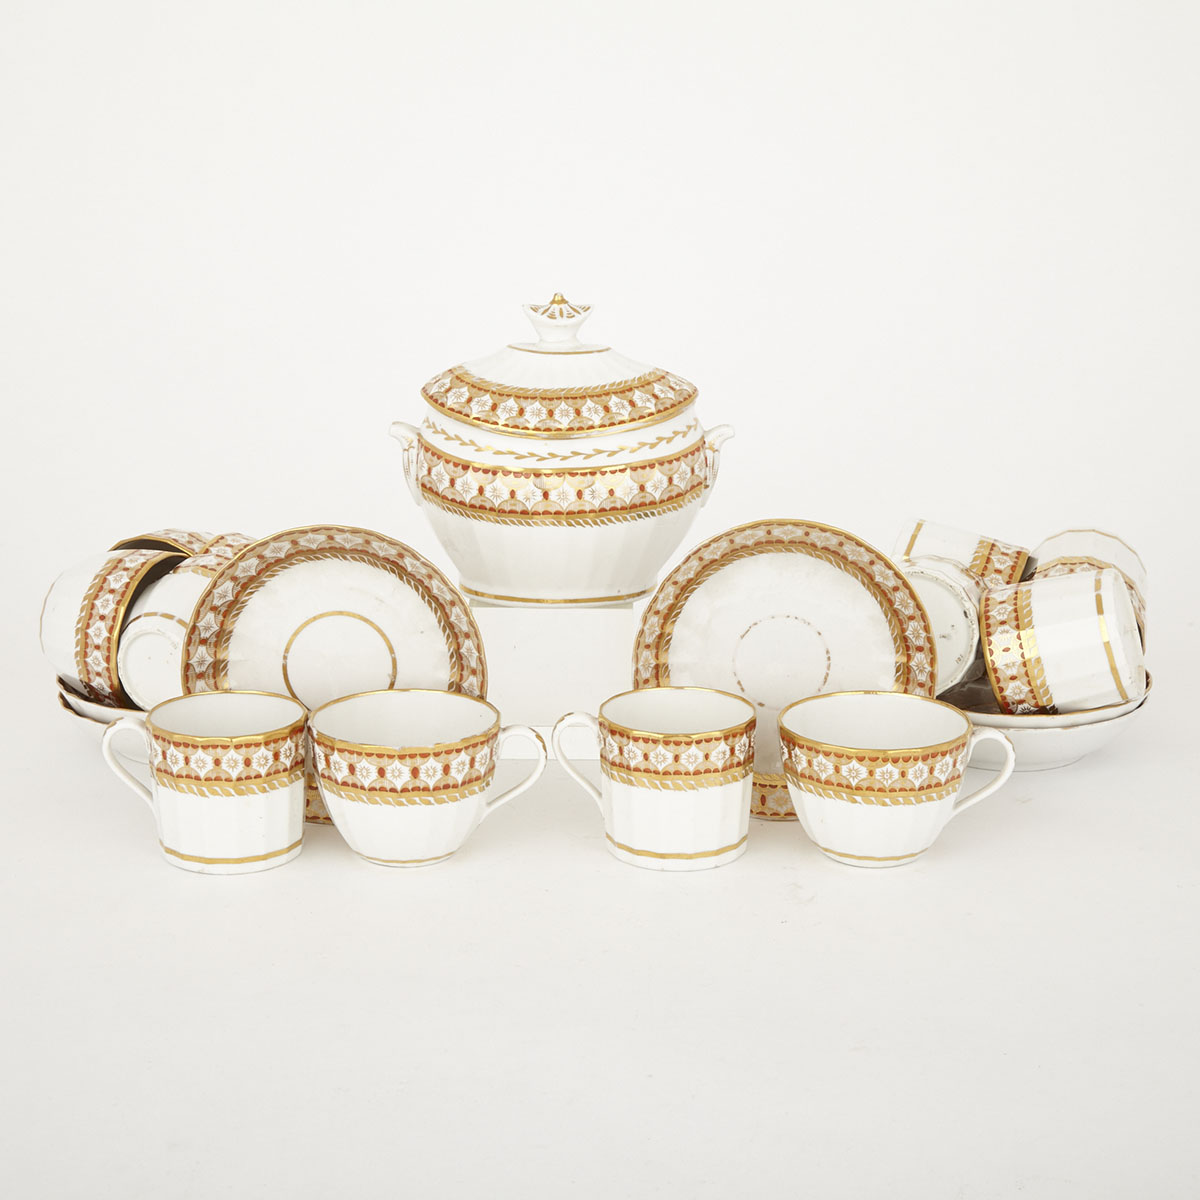 Six Coalport Orange and Gilt Fluted Trios and a Covered Sucrier, c.1810